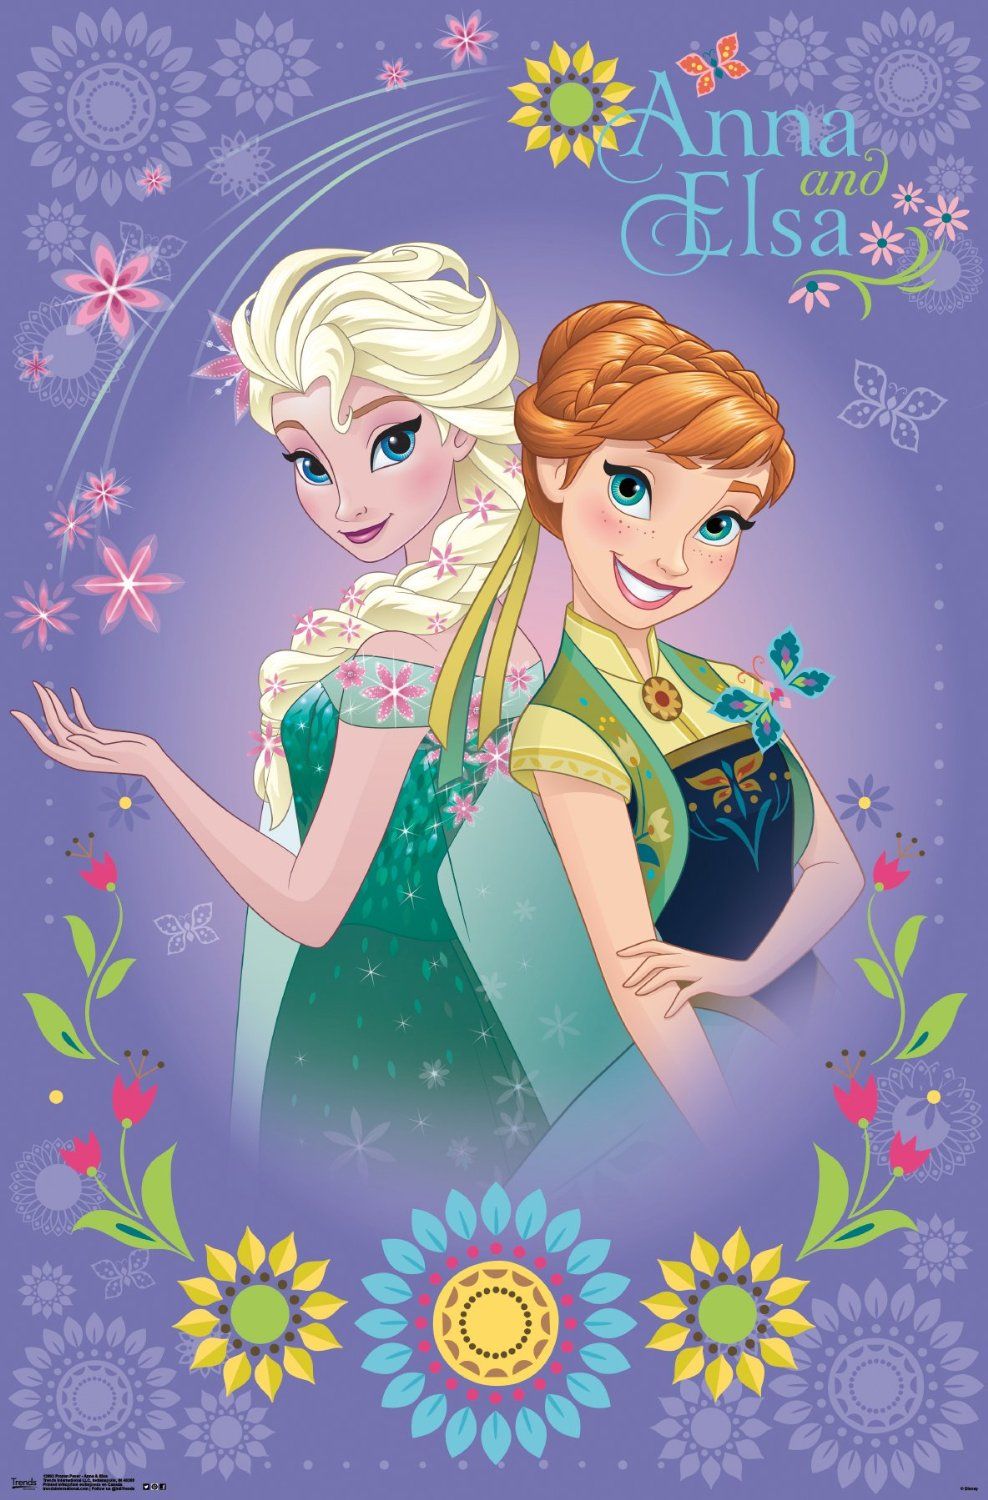 Elsa and Anna the Snow Queen Photo